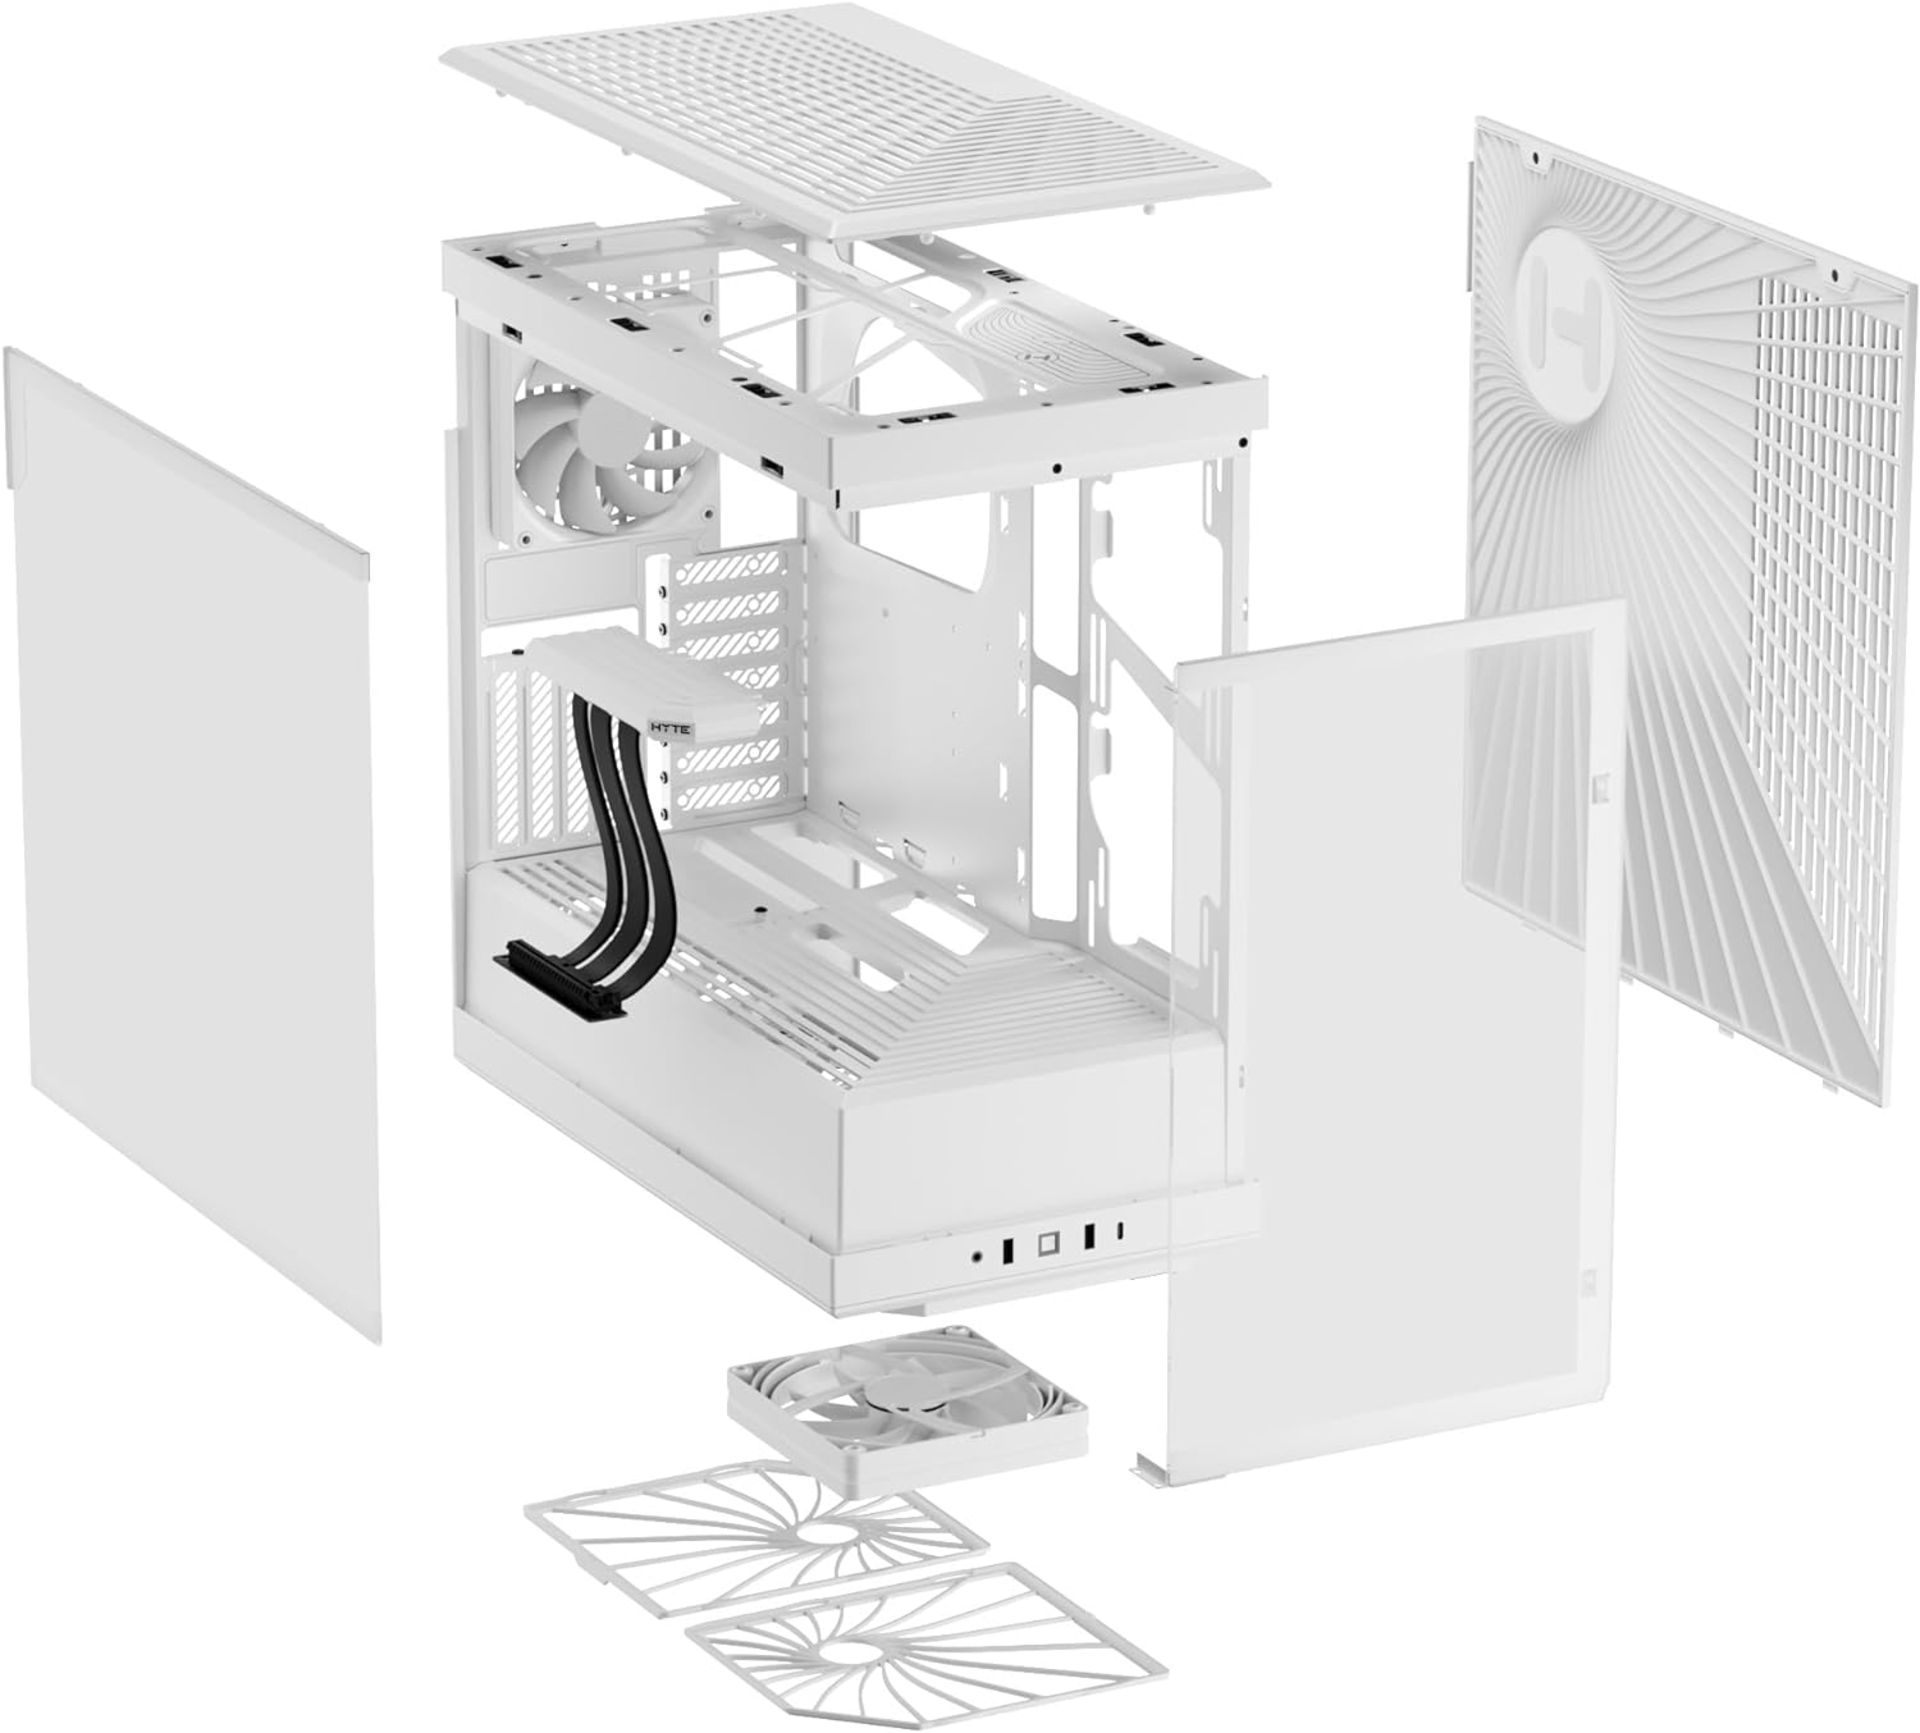 BRAND NEW FACTORY SEALED HYTE Y40 Modern Aesthetic Panoramic Tempered Glass Mid-Tower ATX Computer - Image 6 of 6